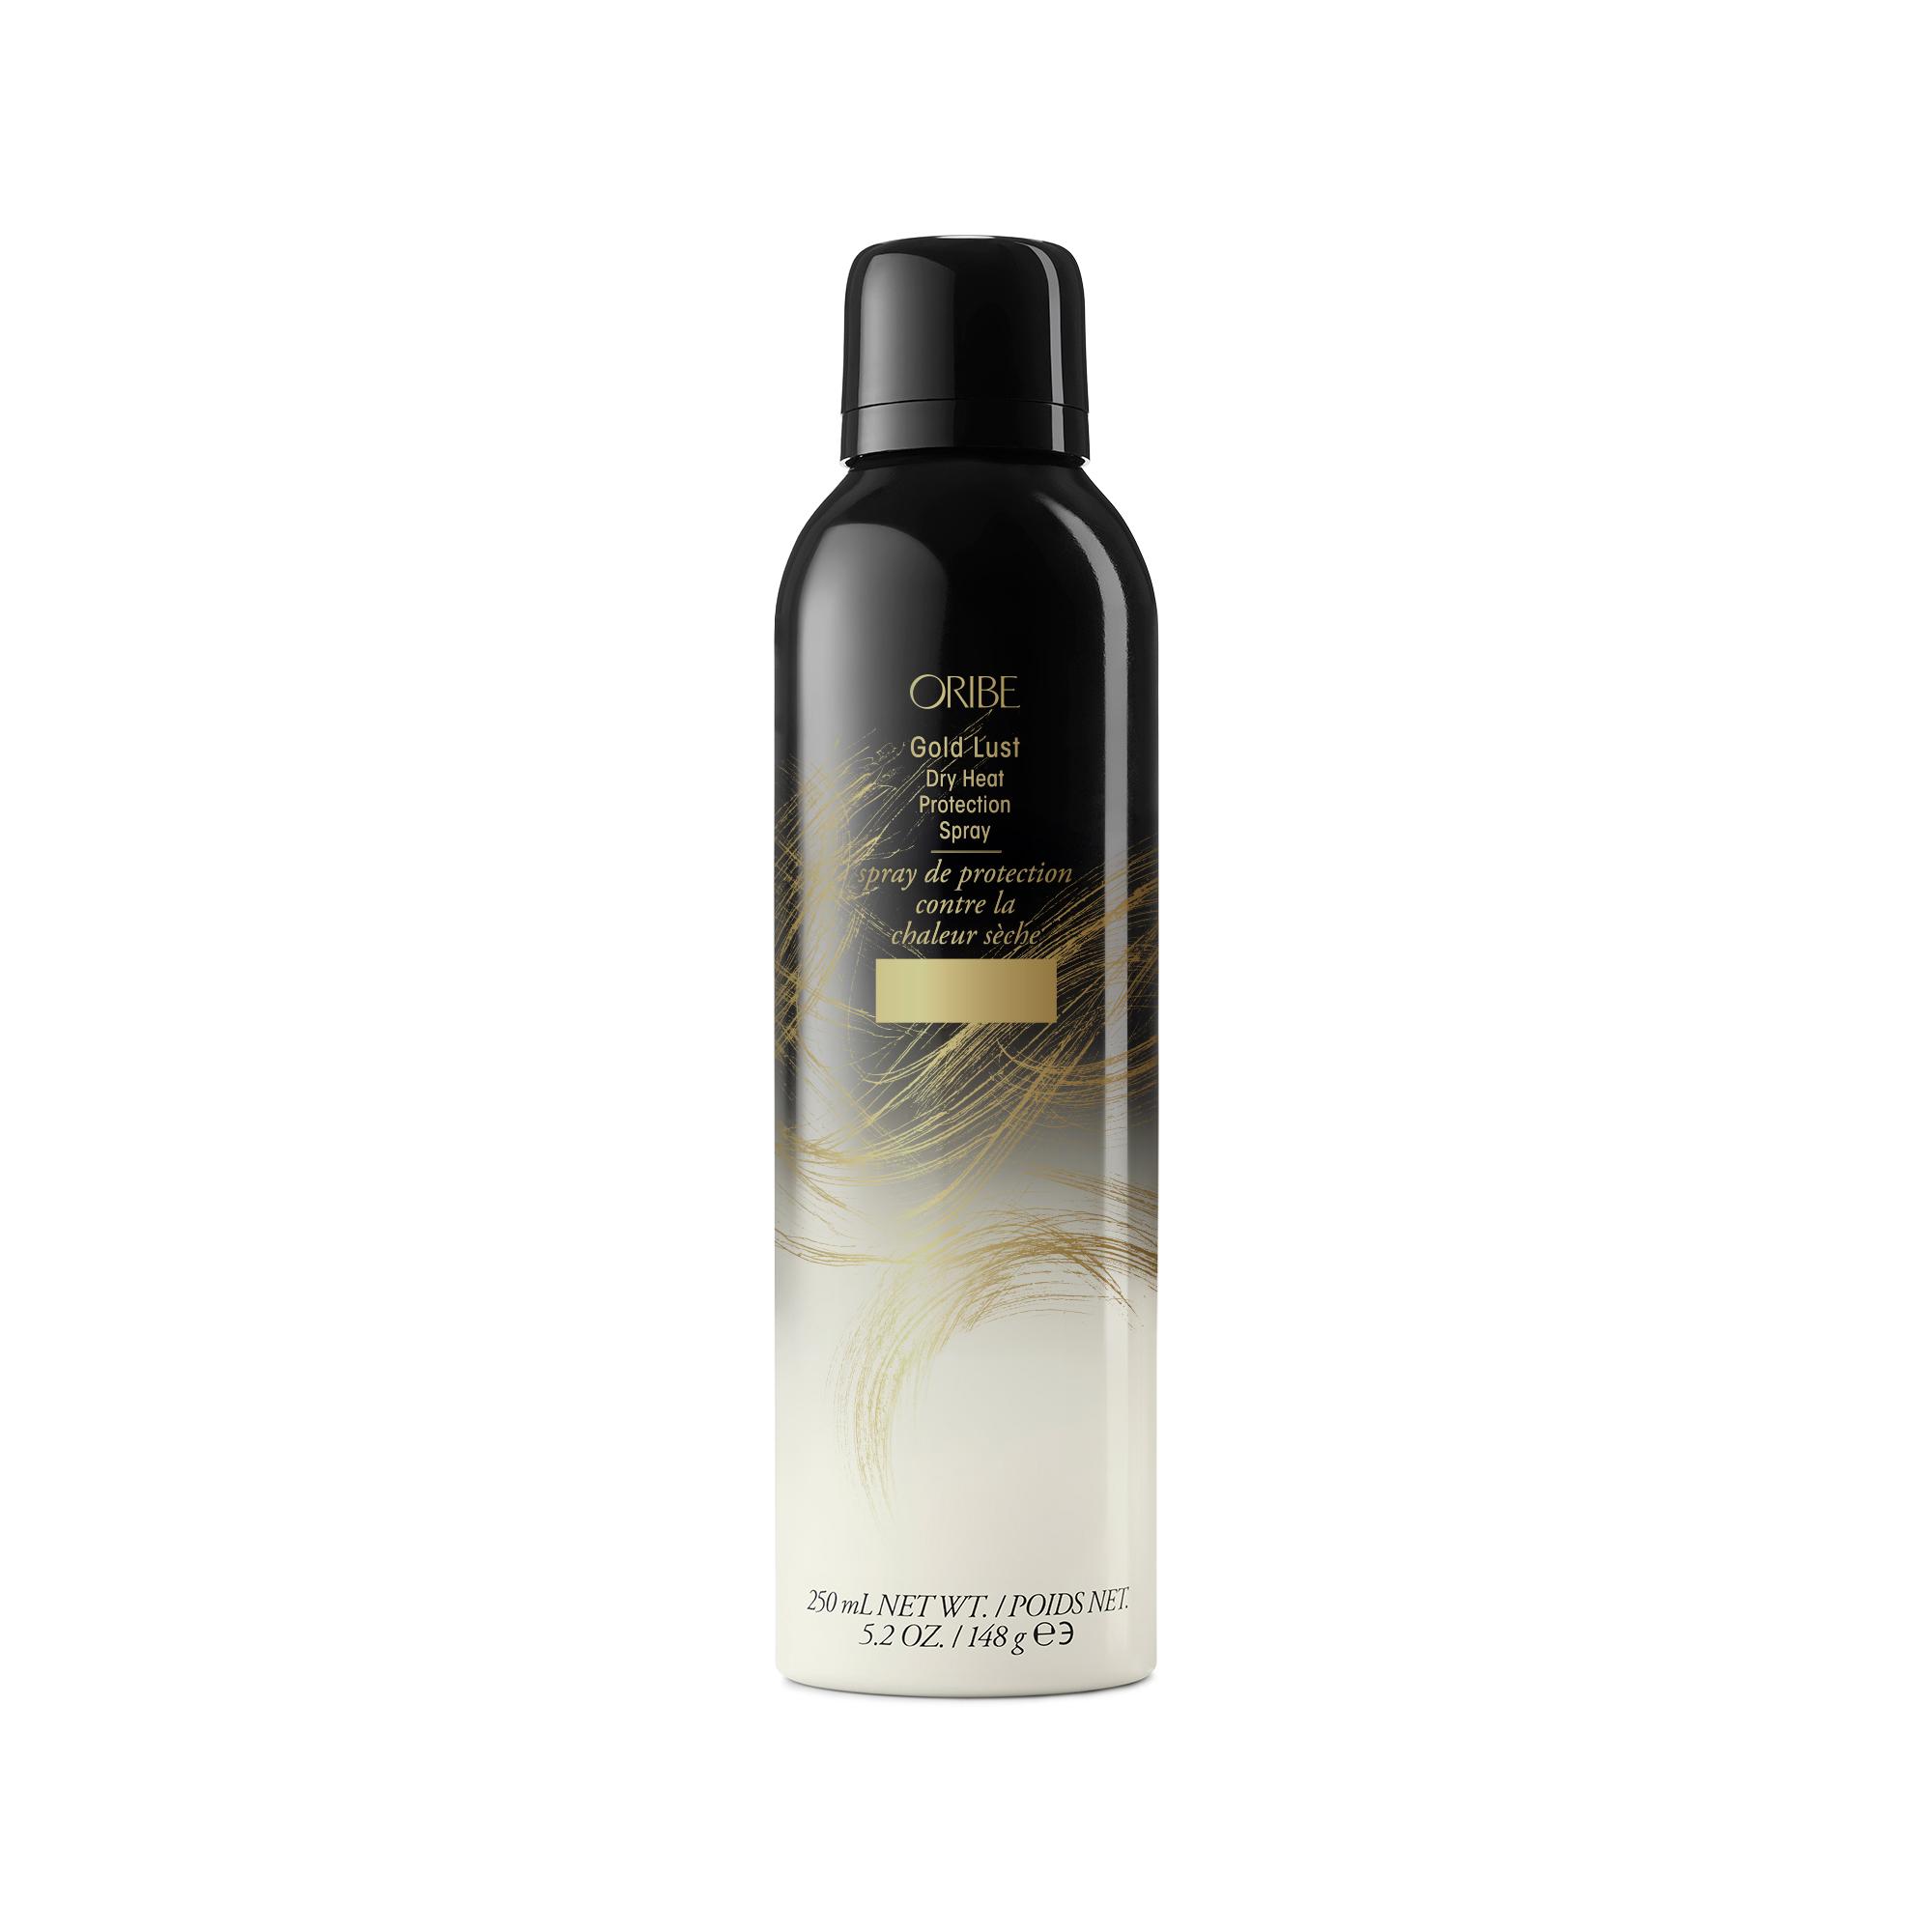 Oribe Care - Gold Lust Dry Heat Protection Spray